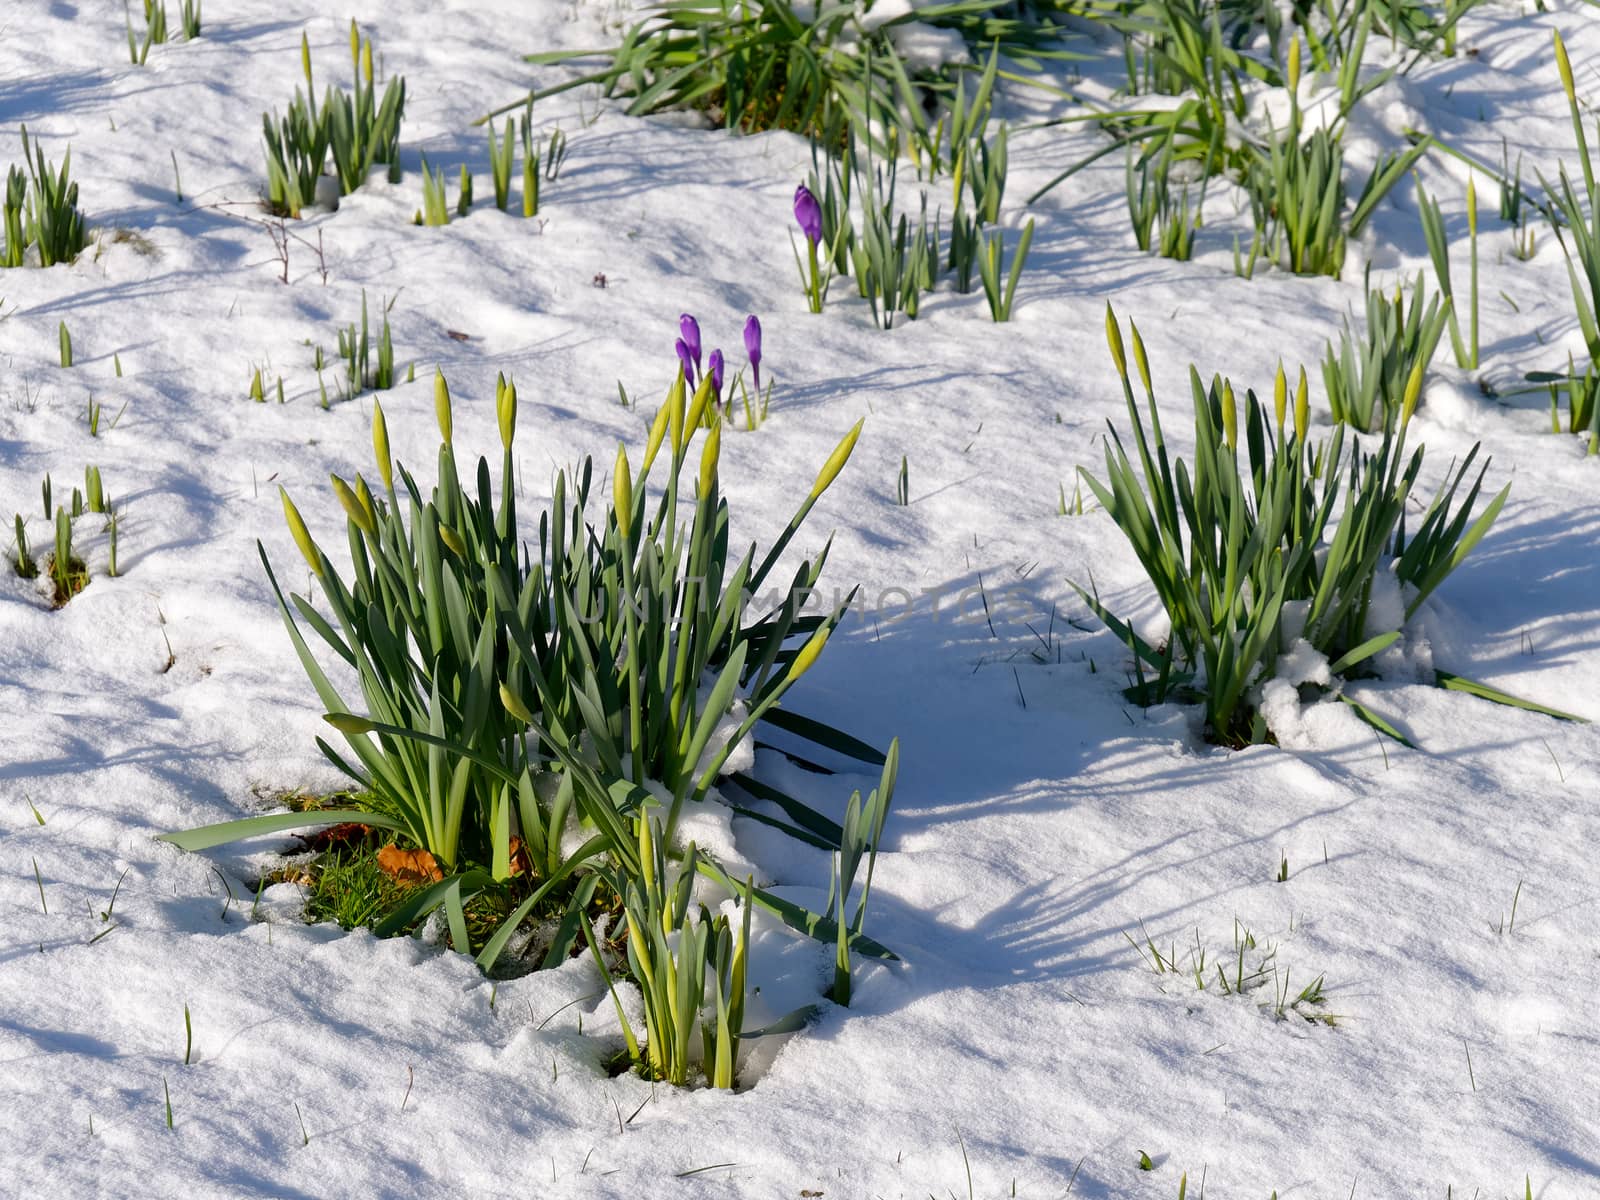 Daffodils in Bud and Crocuses Flowering in the Snow in East Grin by phil_bird